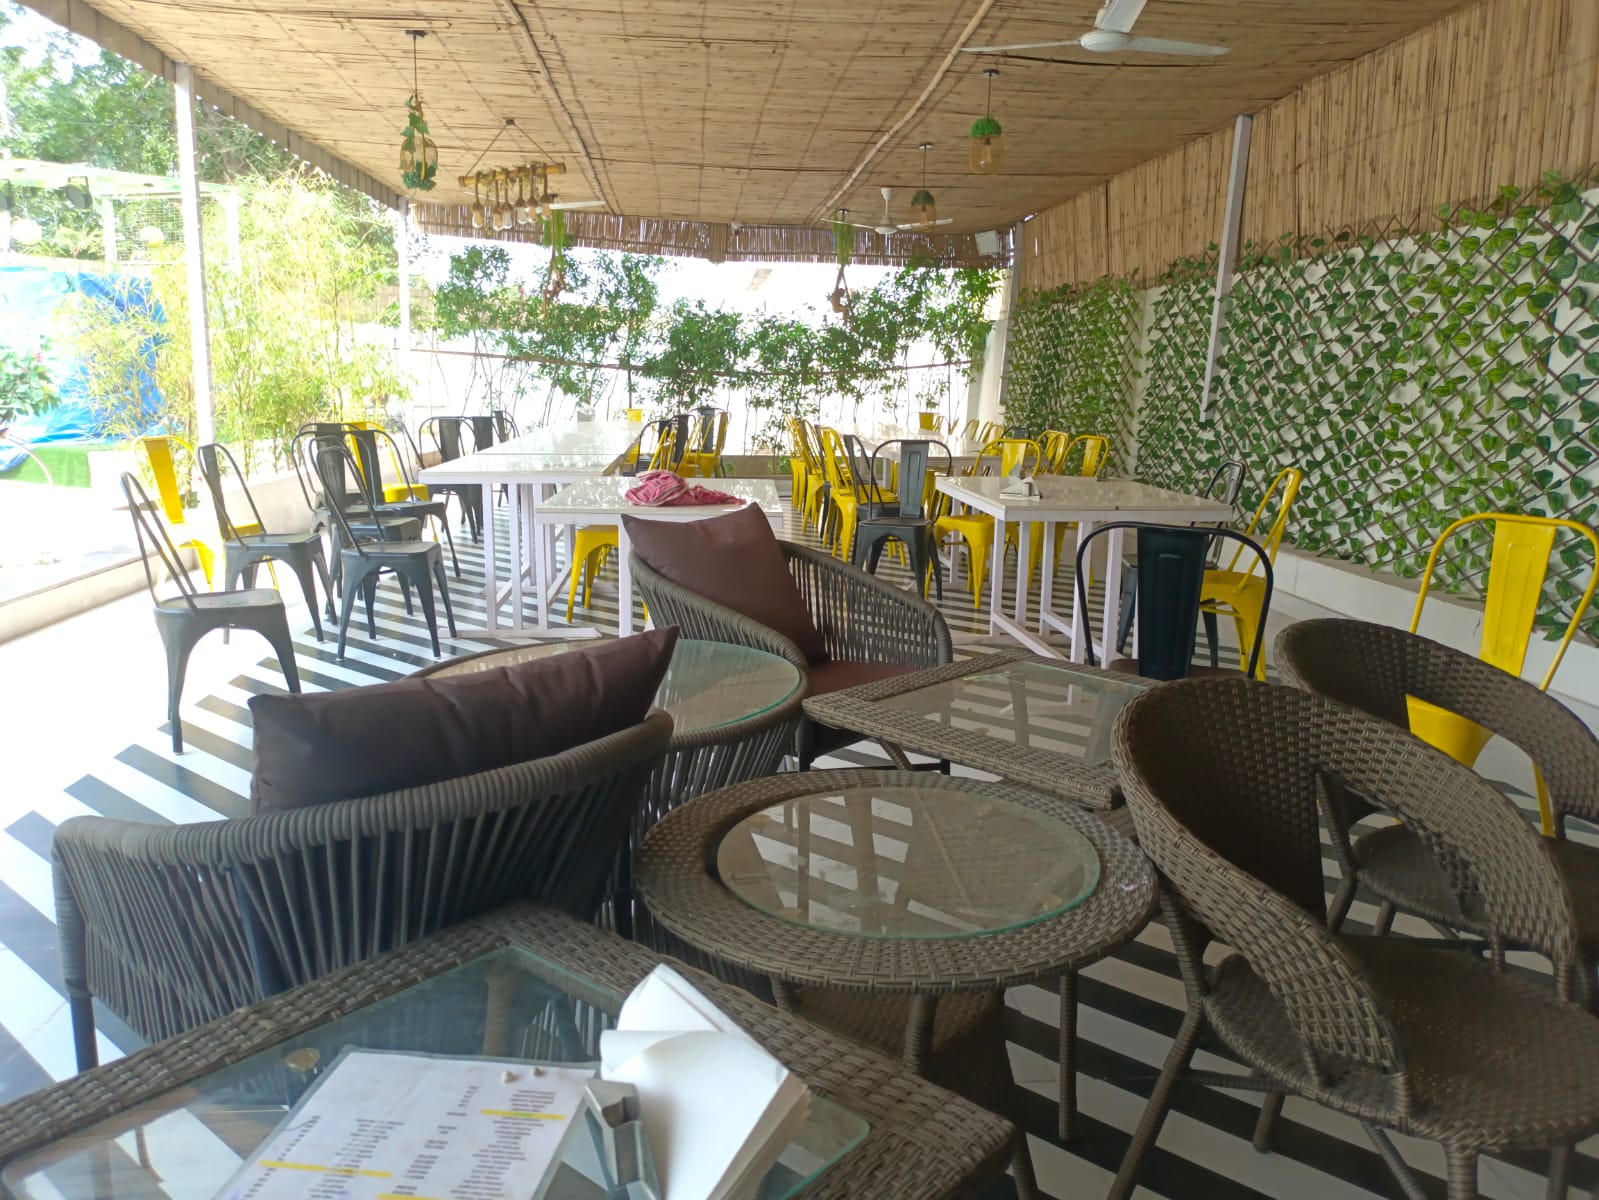 Terrace Area at Garden of flavours